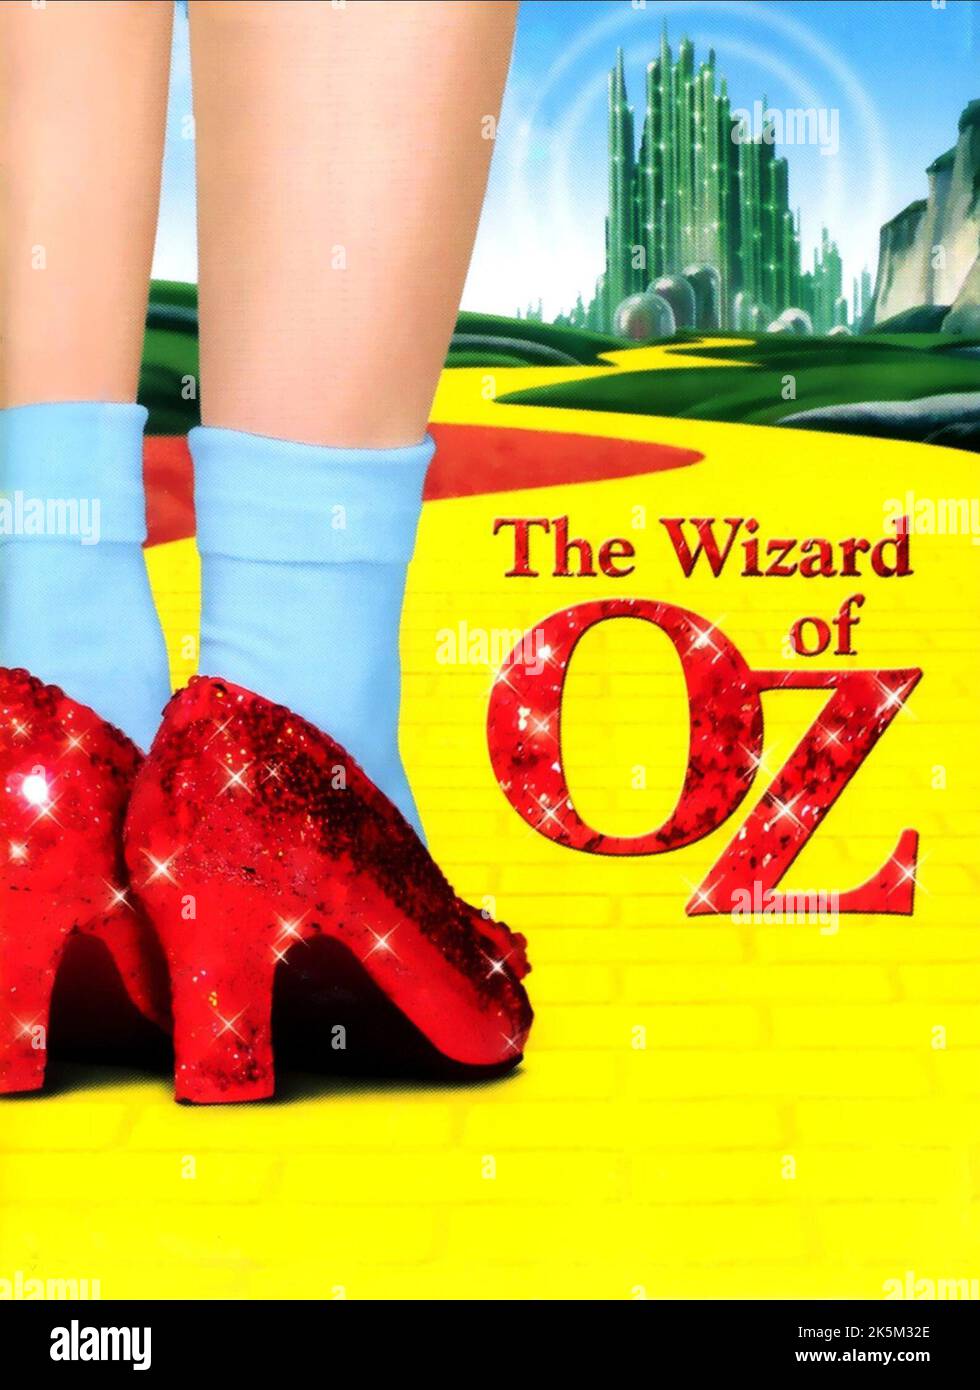 The Wizard Of Oz 1939 The Wizard Of Oz Movie Poster Judy Garland Stock Photo